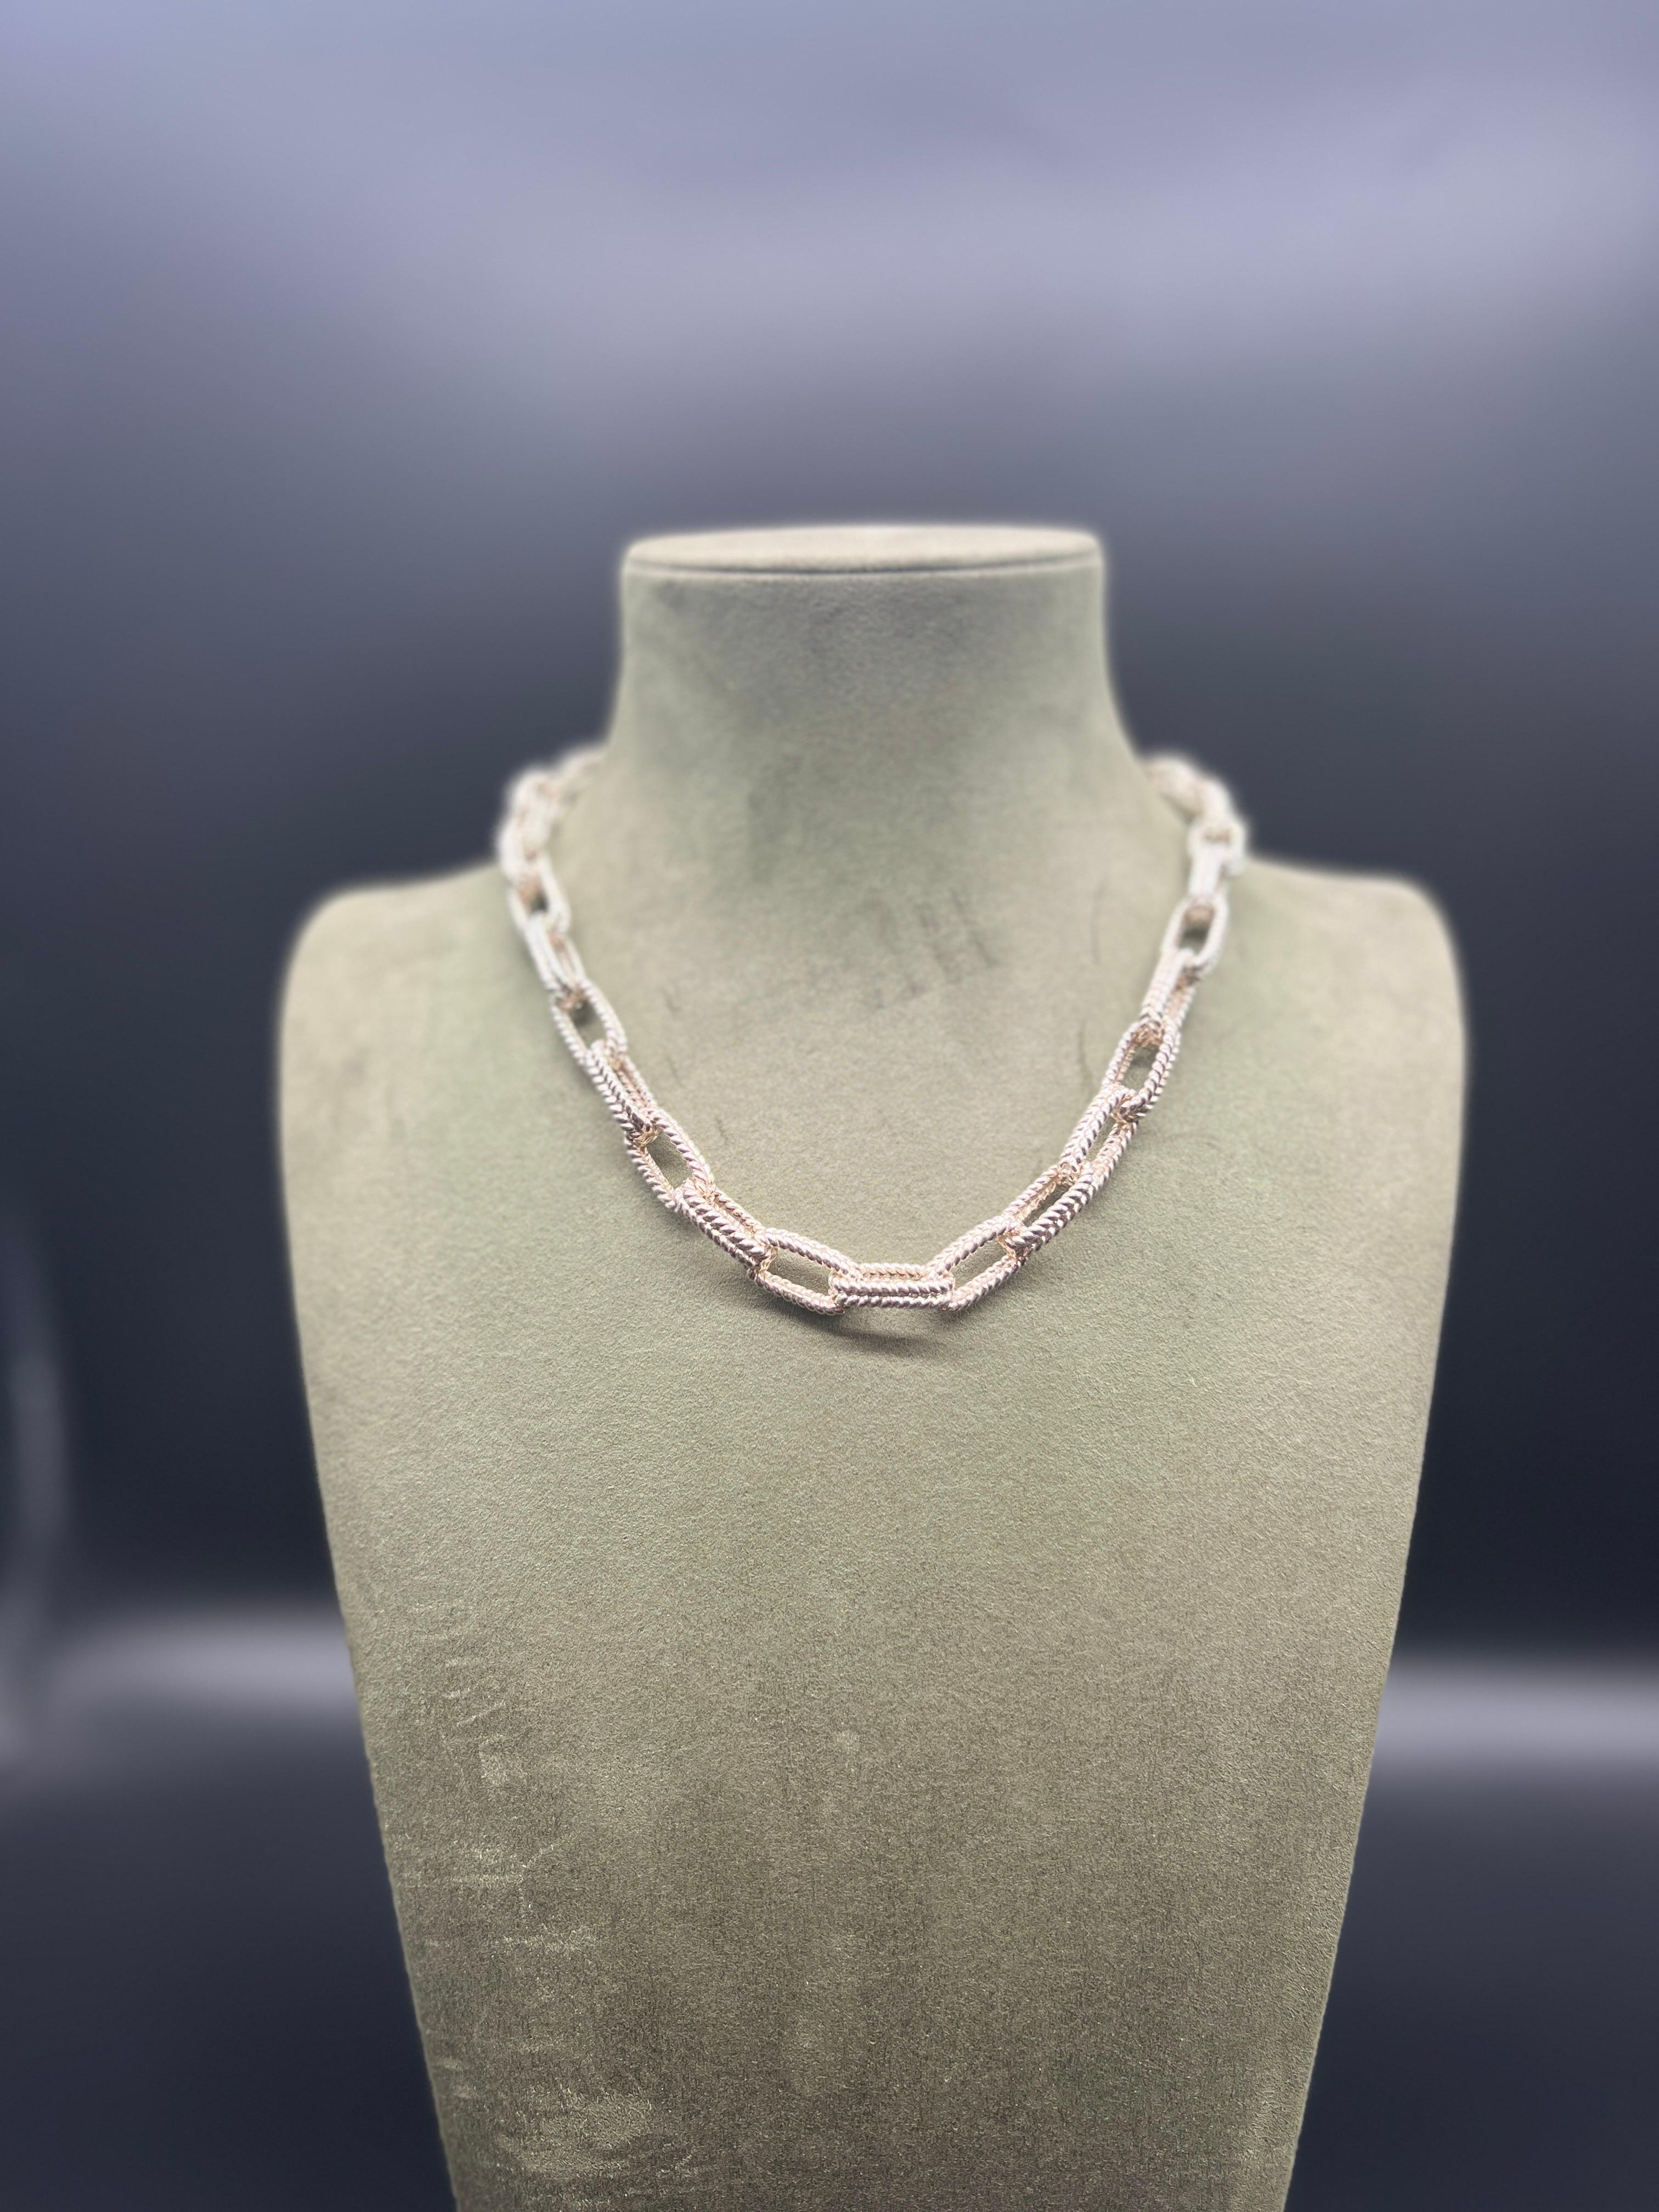 Necklace Mesh Chain Braided Decorated Silver 925 In Good Condition For Sale In Vannes, FR